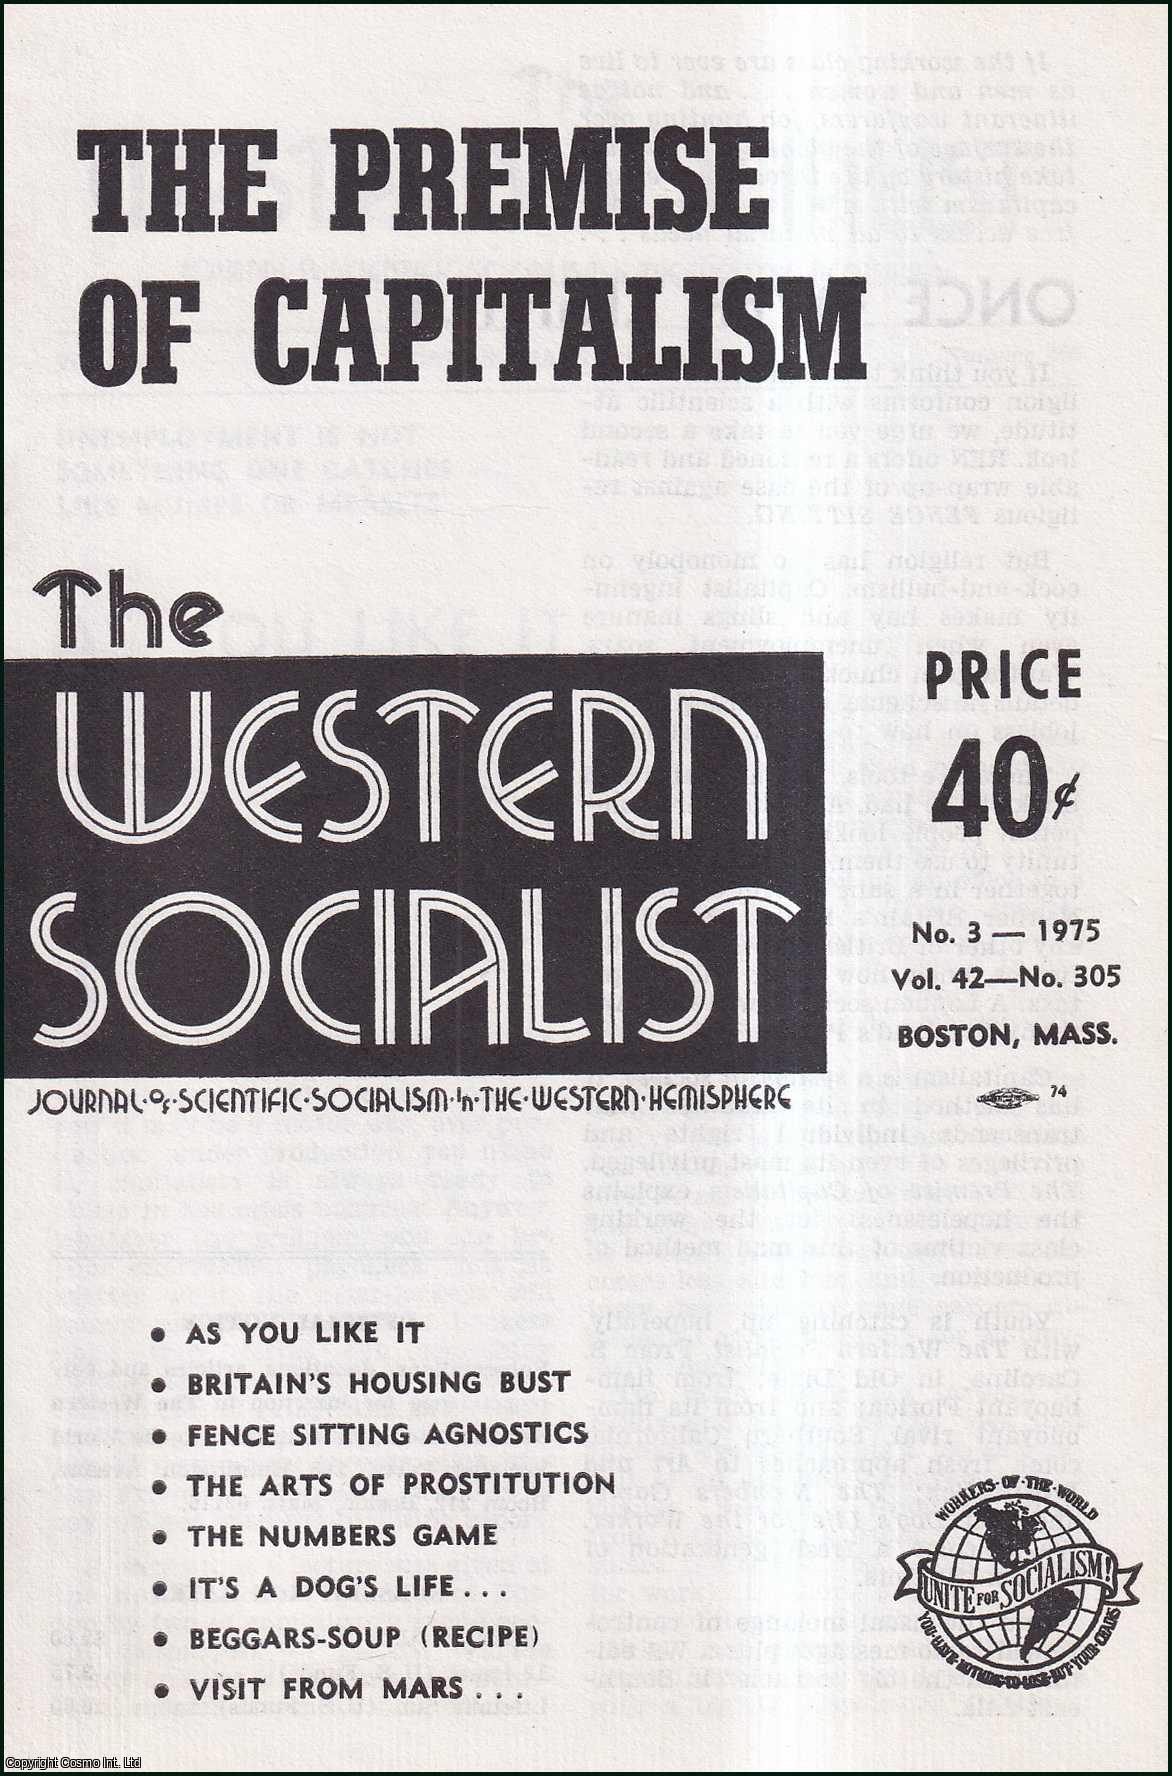 Western Socialist - The Premise of Capitalism, and other articles: Issue No. 3 of the Western Socialist, 1975